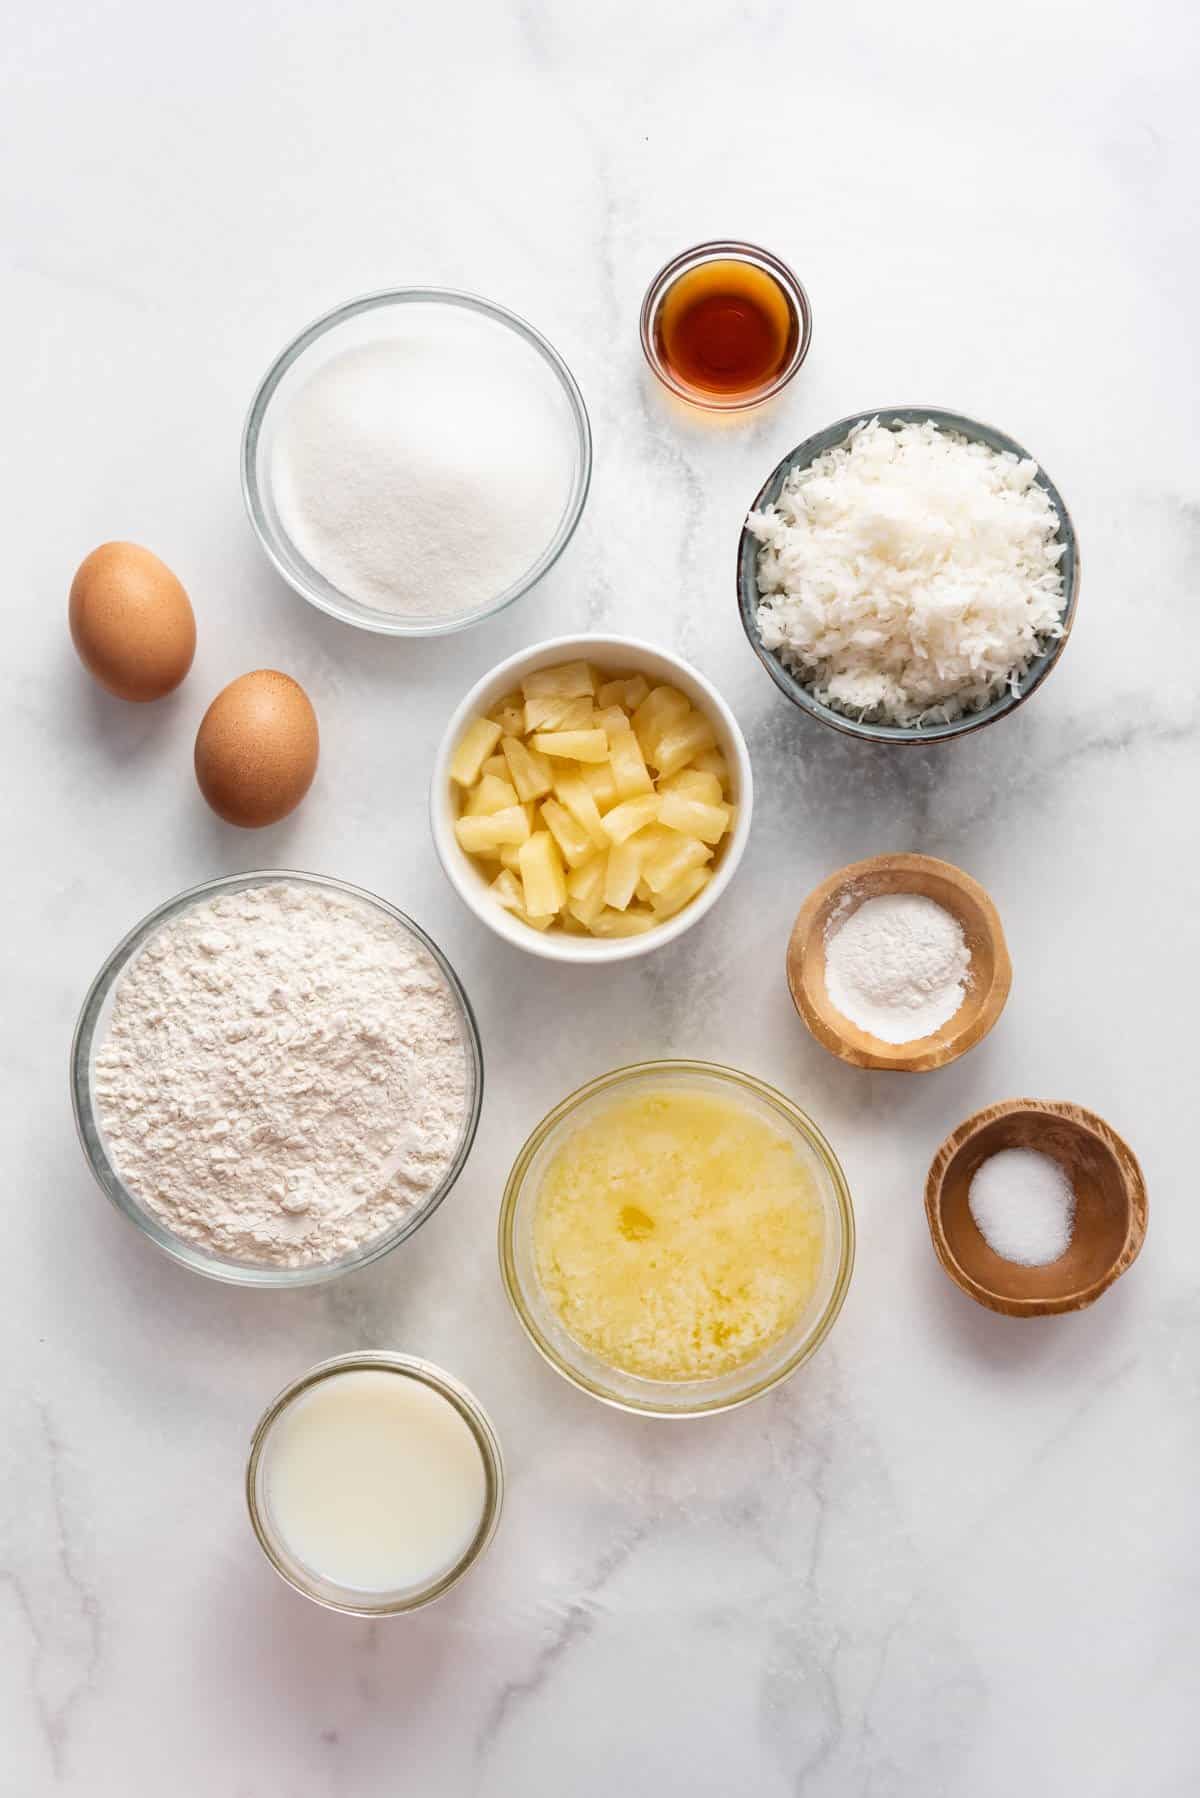 Ingredients for pineapple coconut muffins.